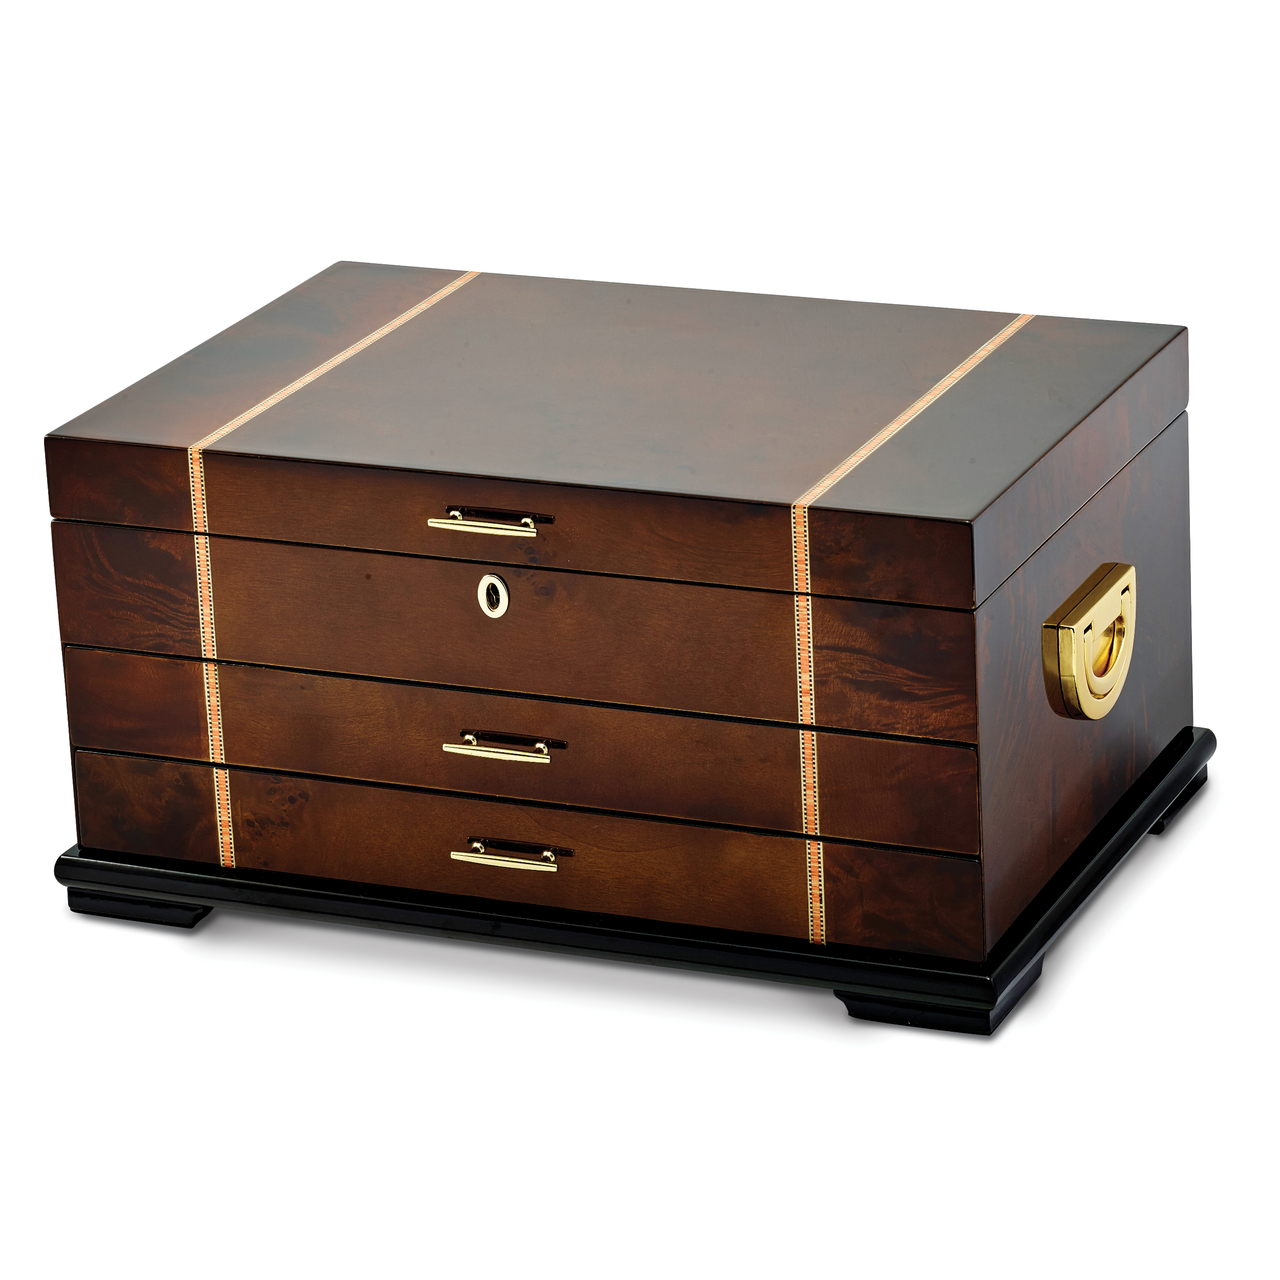 High Gloss Rustic Burlwood with Walnut Inlay 2-drawer Jewelry Chest by Jere